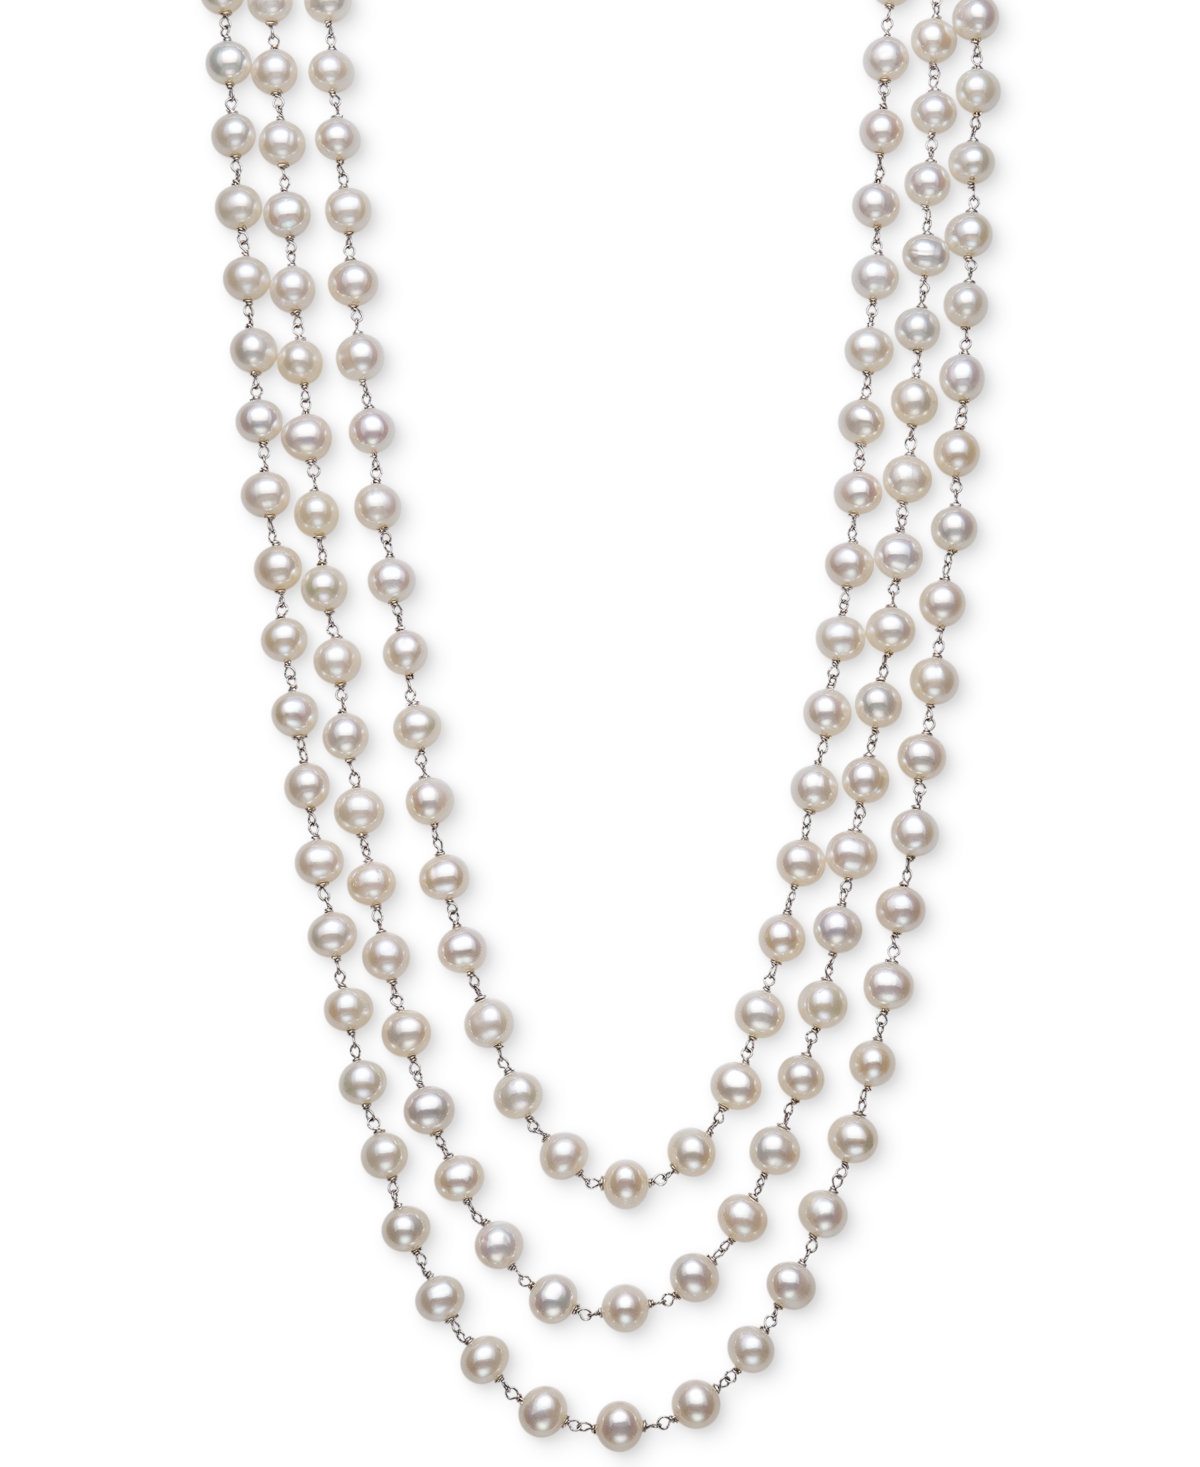 Cultured Freshwater Pearl (7mm) Triple Strand 18" Statement Necklace in Sterling Silver - Silver